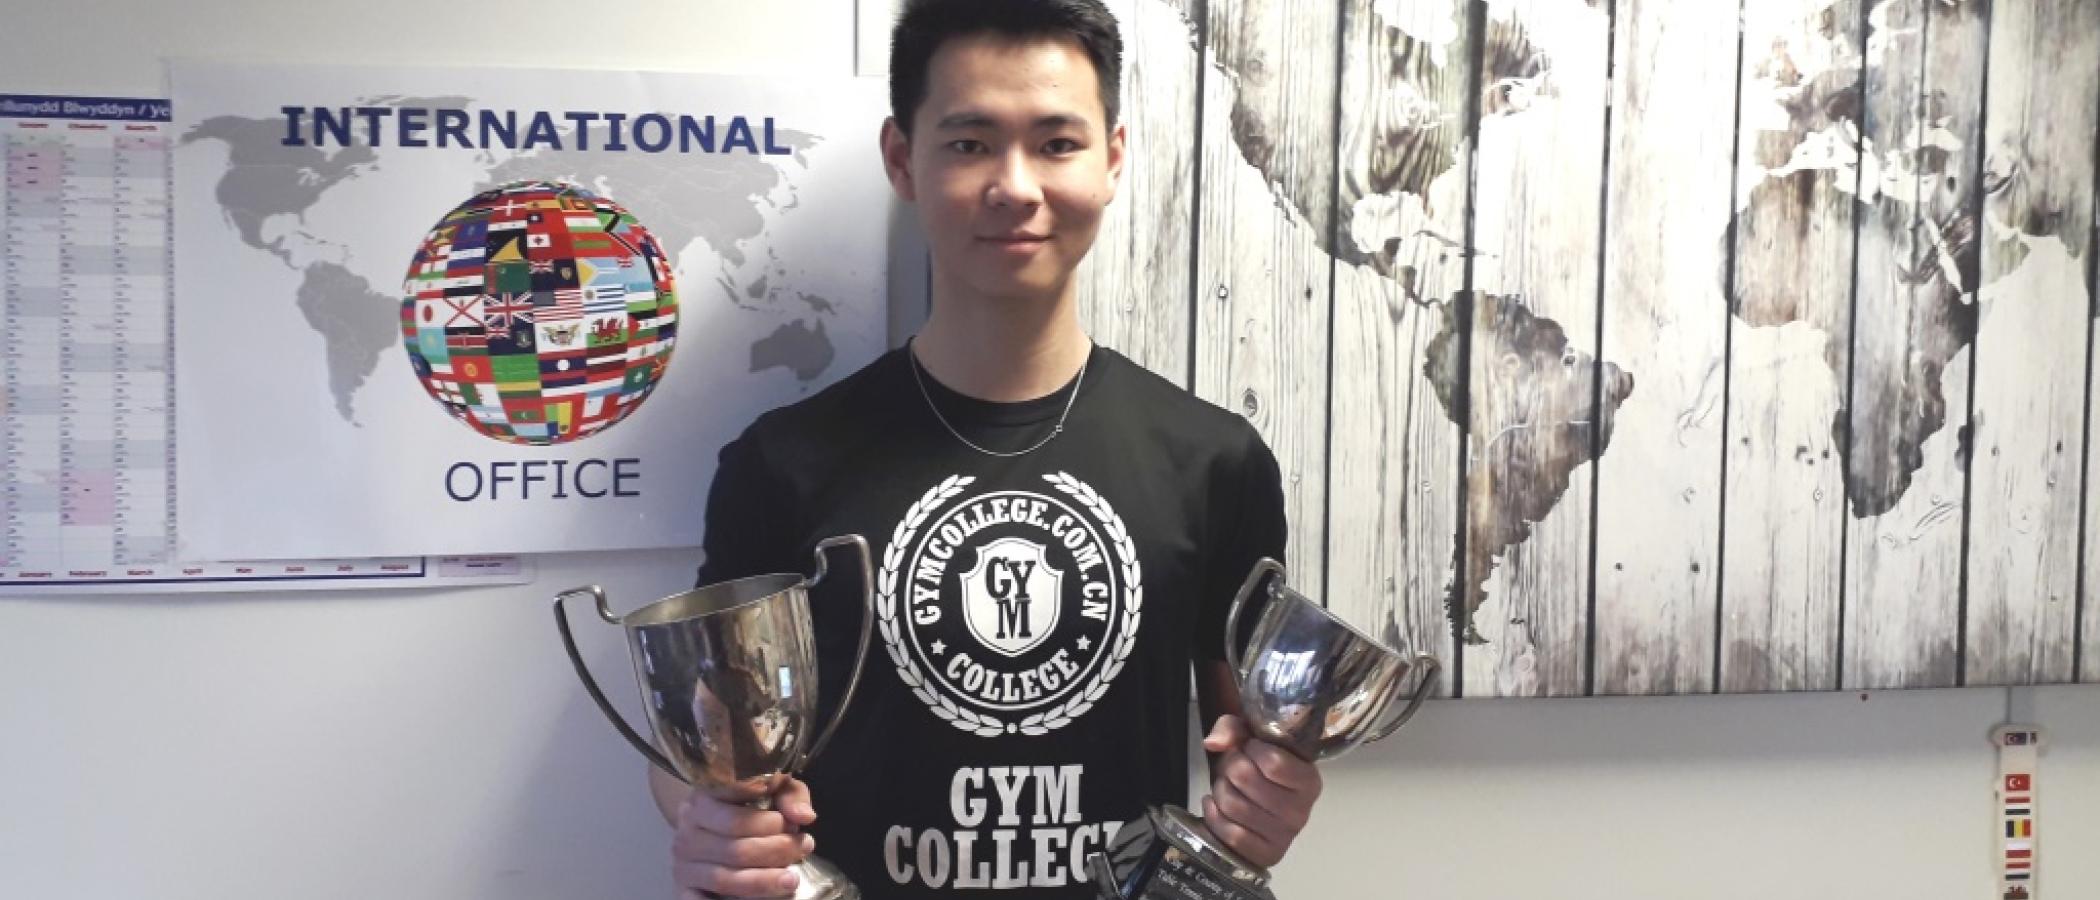 Table tennis success for International student